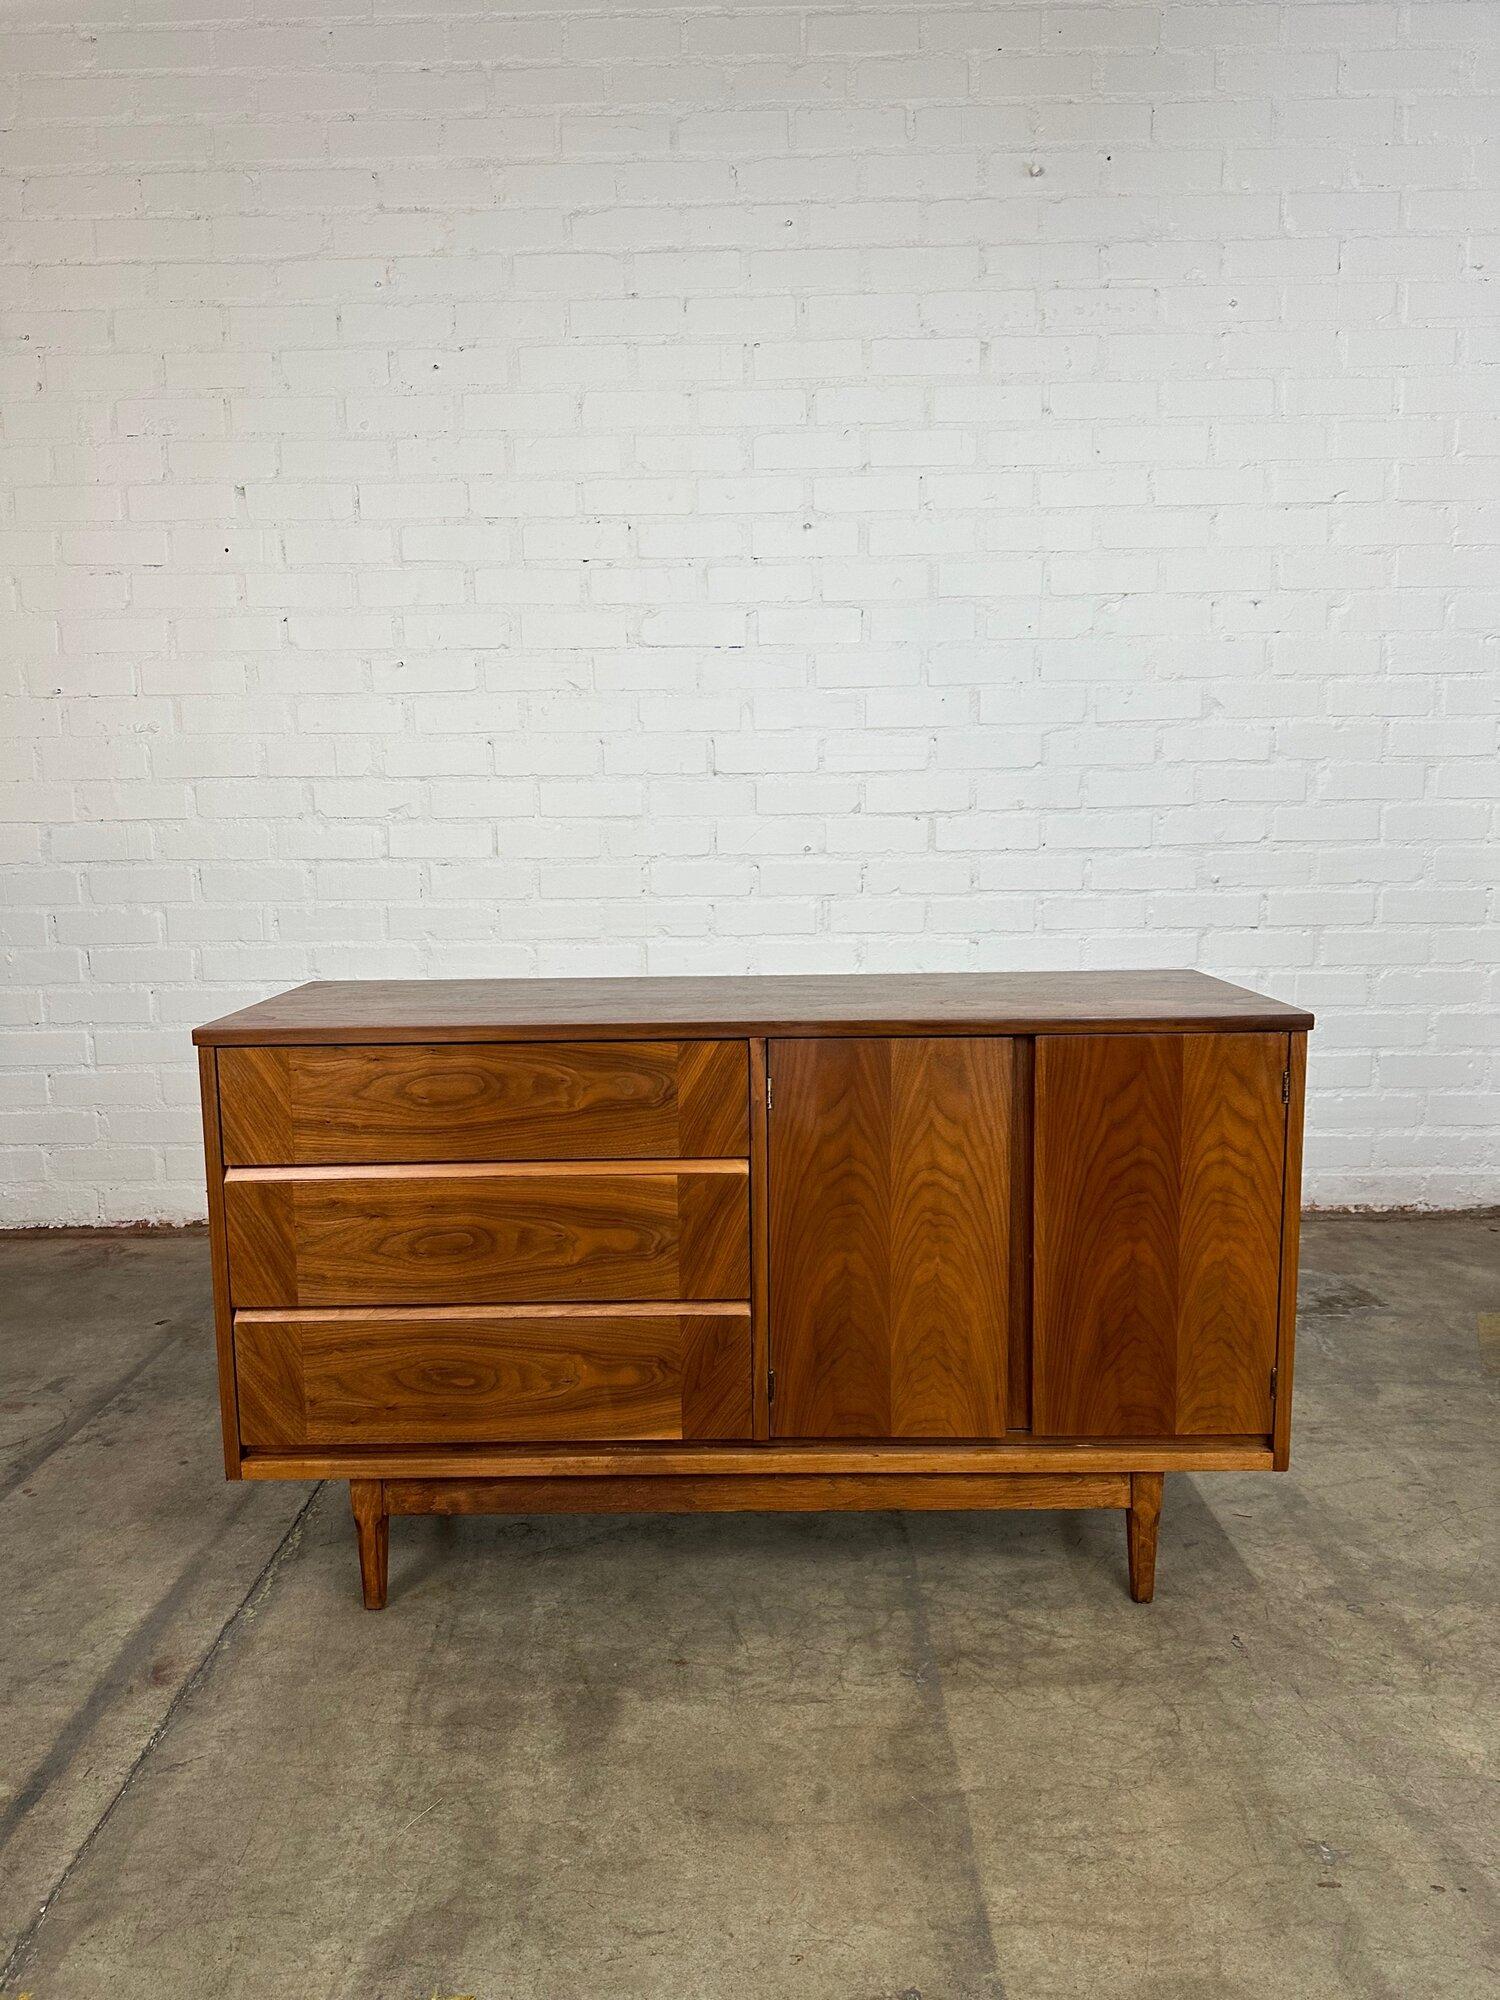 W54 D19 H31.

Fully restored walnut credenza in great condition. Item is structurally sound and fully functional with original hardware and wooden rails. Item has hidden pulls and features cross grain detail.